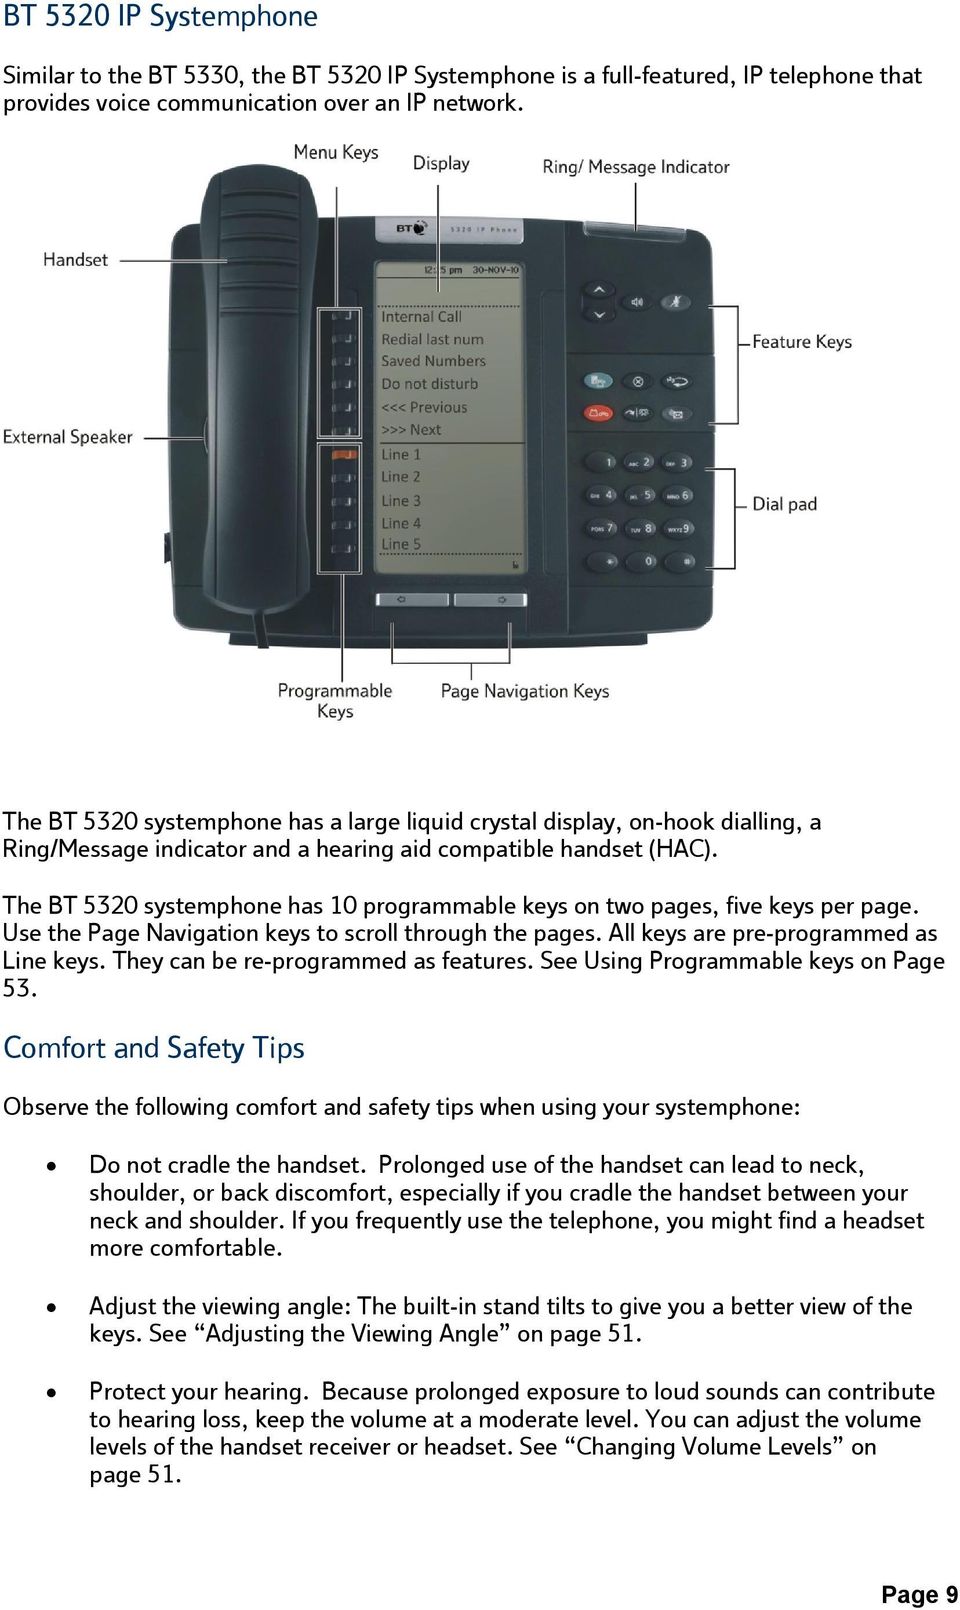 The BT 5320 systemphone has 10 programmable keys on two pages, five keys per page. Use the Page Navigation keys to scroll through the pages. All keys are pre-programmed as Line keys.